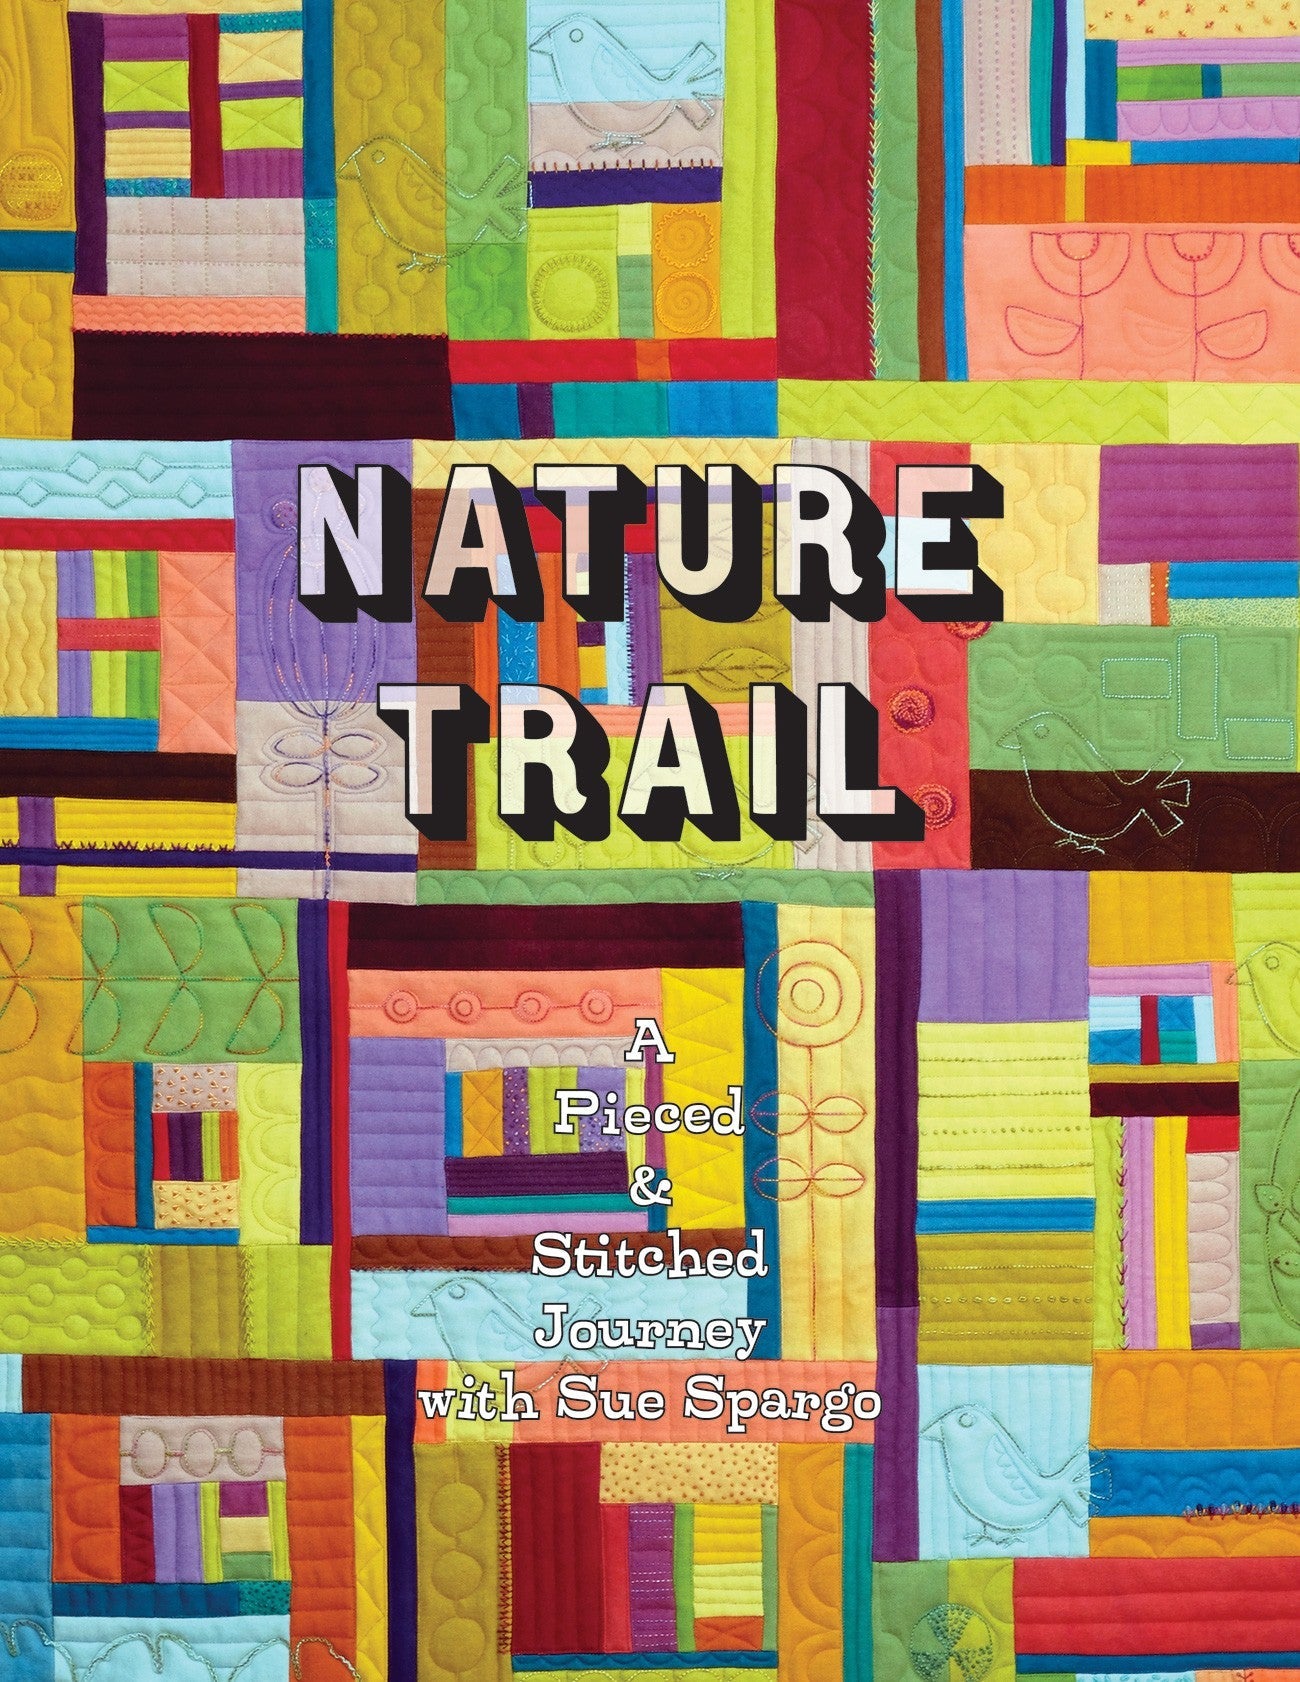 Nature Trail - Applique, Embroidery, and Quilt Pattern Book by Sue Spargo of Folk Art Quilts - Dings & Dents